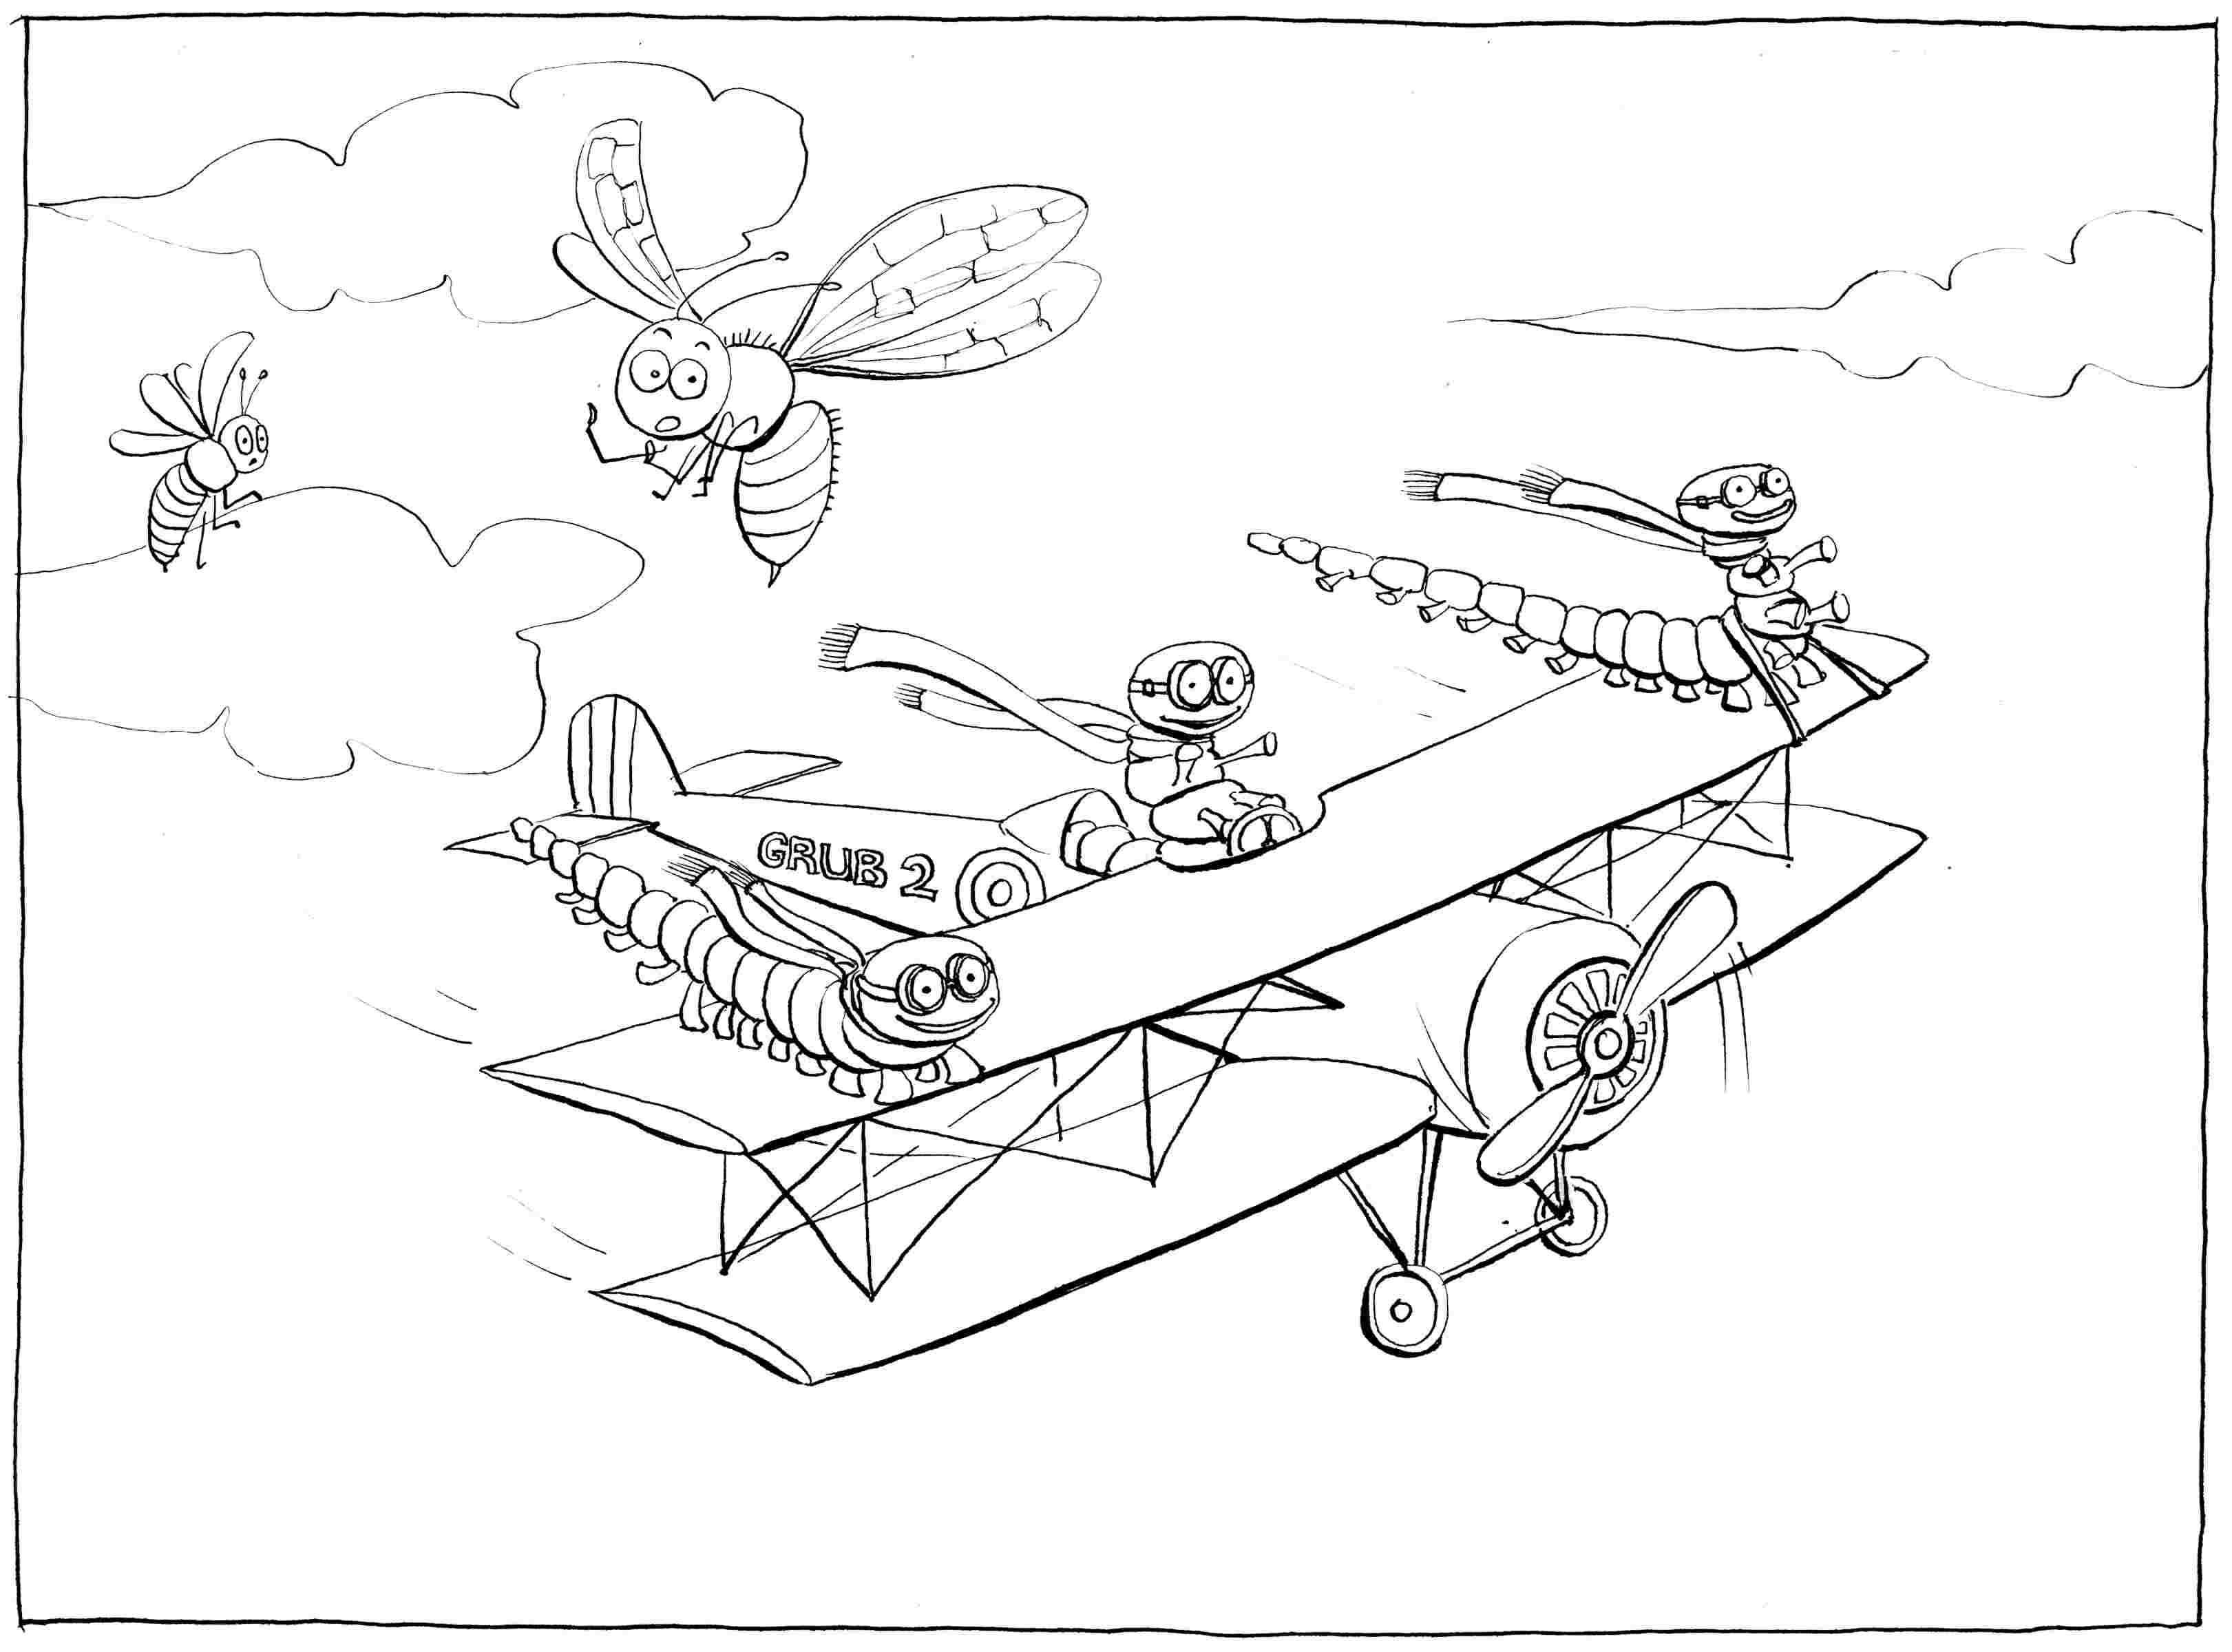 Learning to Fly: part II - colouring-in drawing - to download, right click and save, print out and colour in!